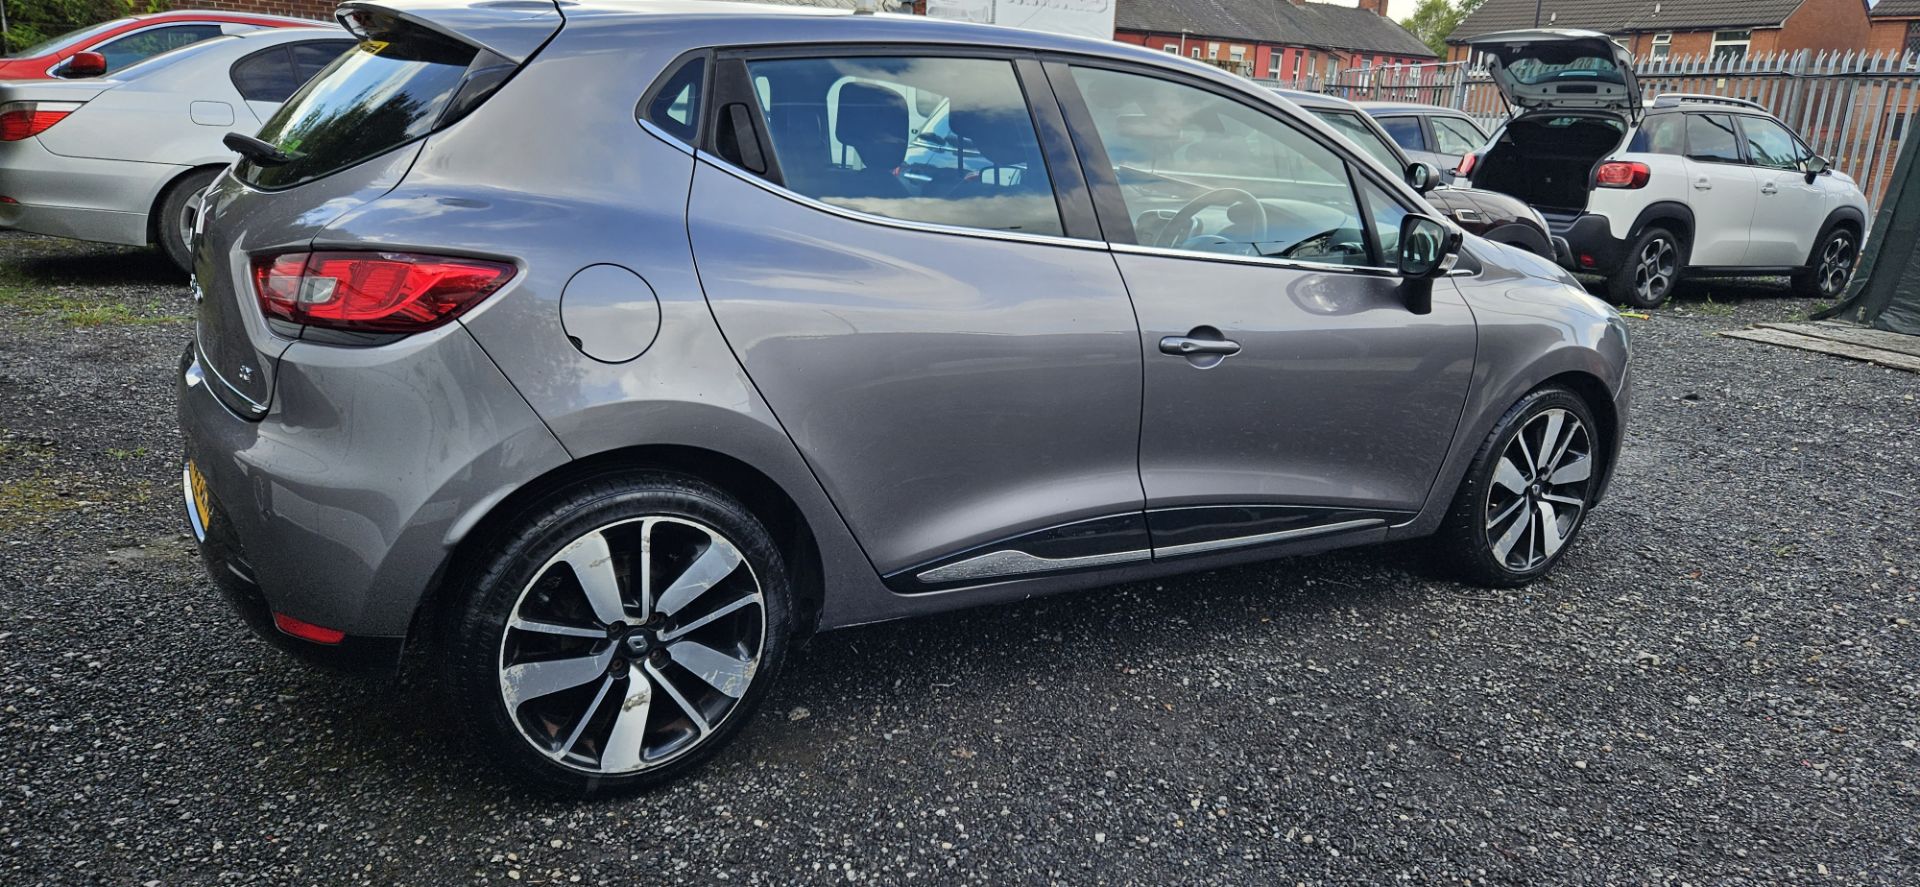 2016 RENAULT CLIO AUTOMATIC - Image 6 of 7